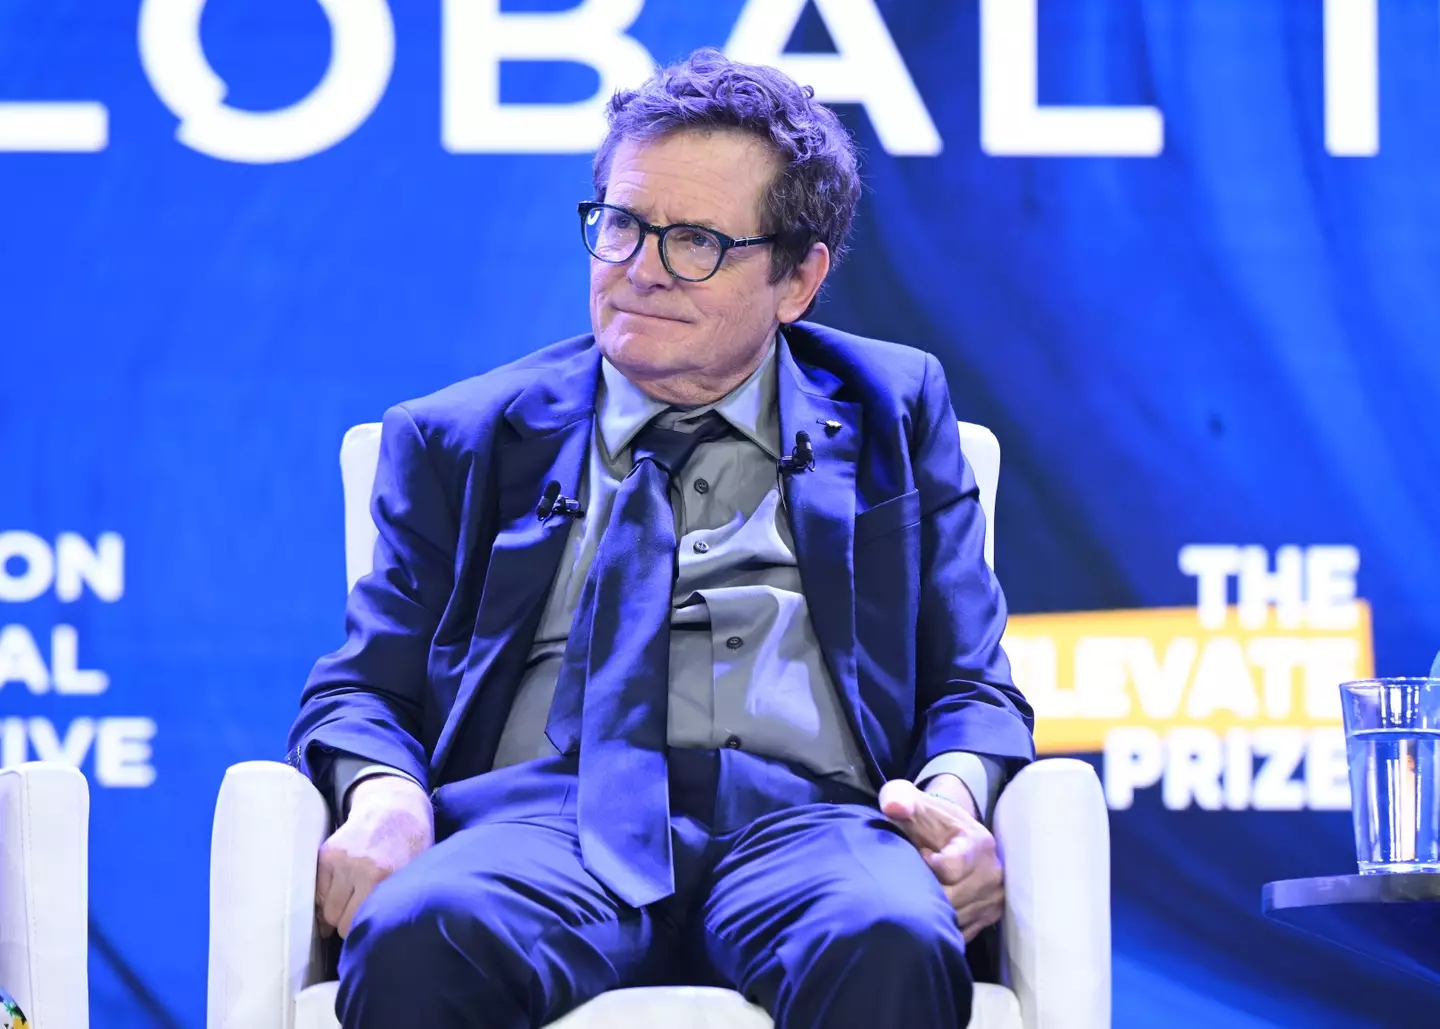 Michael J. Fox has remained in the spotlight since his diagnosis.